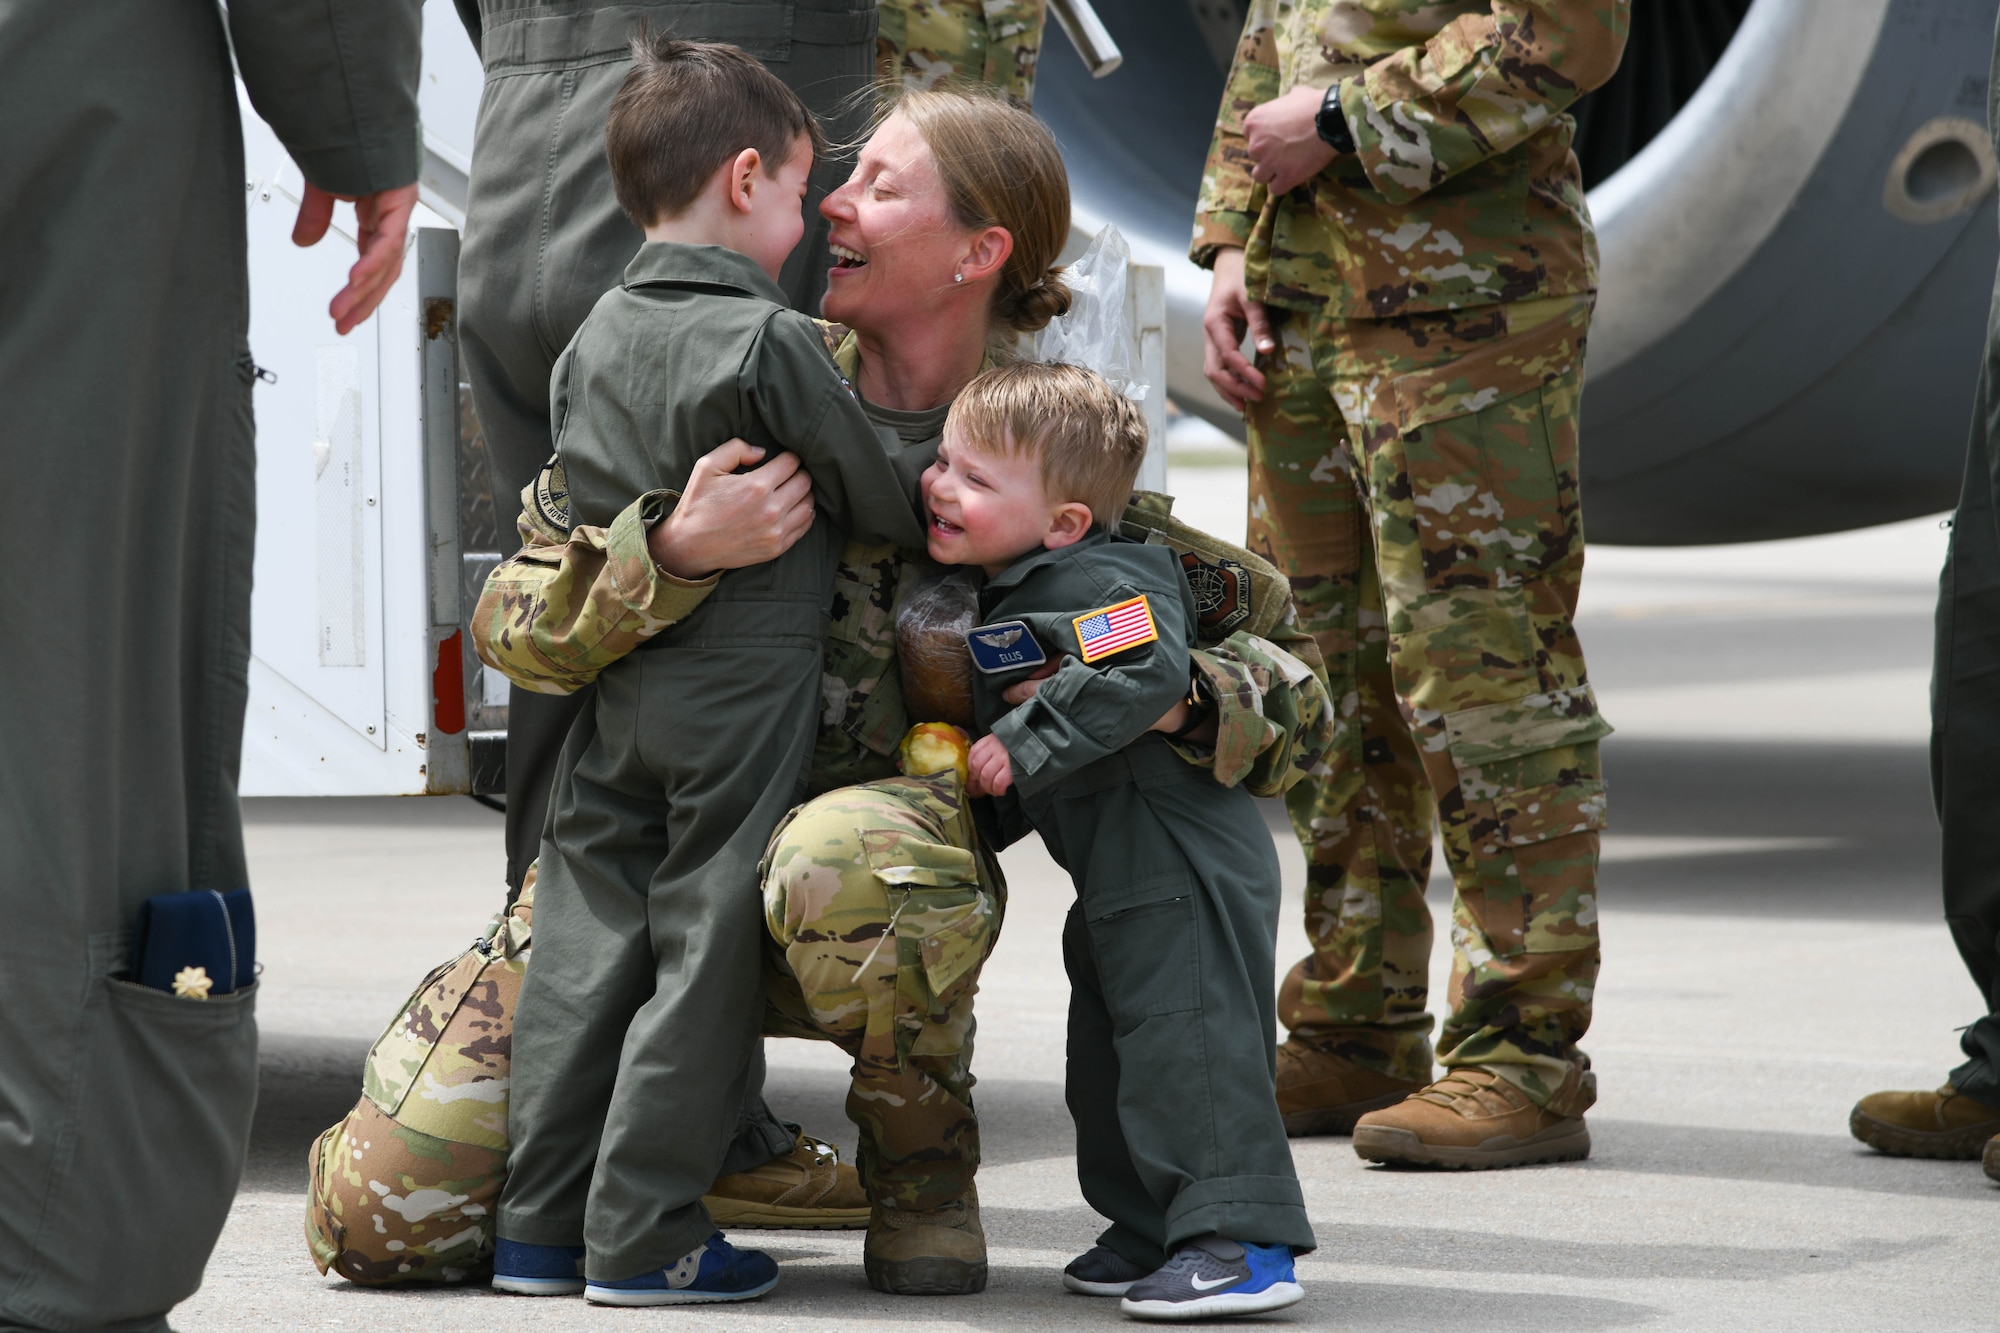 Lt. Col. Sara Bergkamp, 349th Air Refueling Squadron director of operations, embraces her children after returning home from deployment April 13, 2021, at McConnell Air Force Base, Kansas. While deployed, the team flew over 800 missions with the KC-135 Stratotanker to support joint and coalition aircraft throughout the CENTCOM area of
responsibility. (U.S. Air Force photo by Senior Airman Nilsa Garcia)